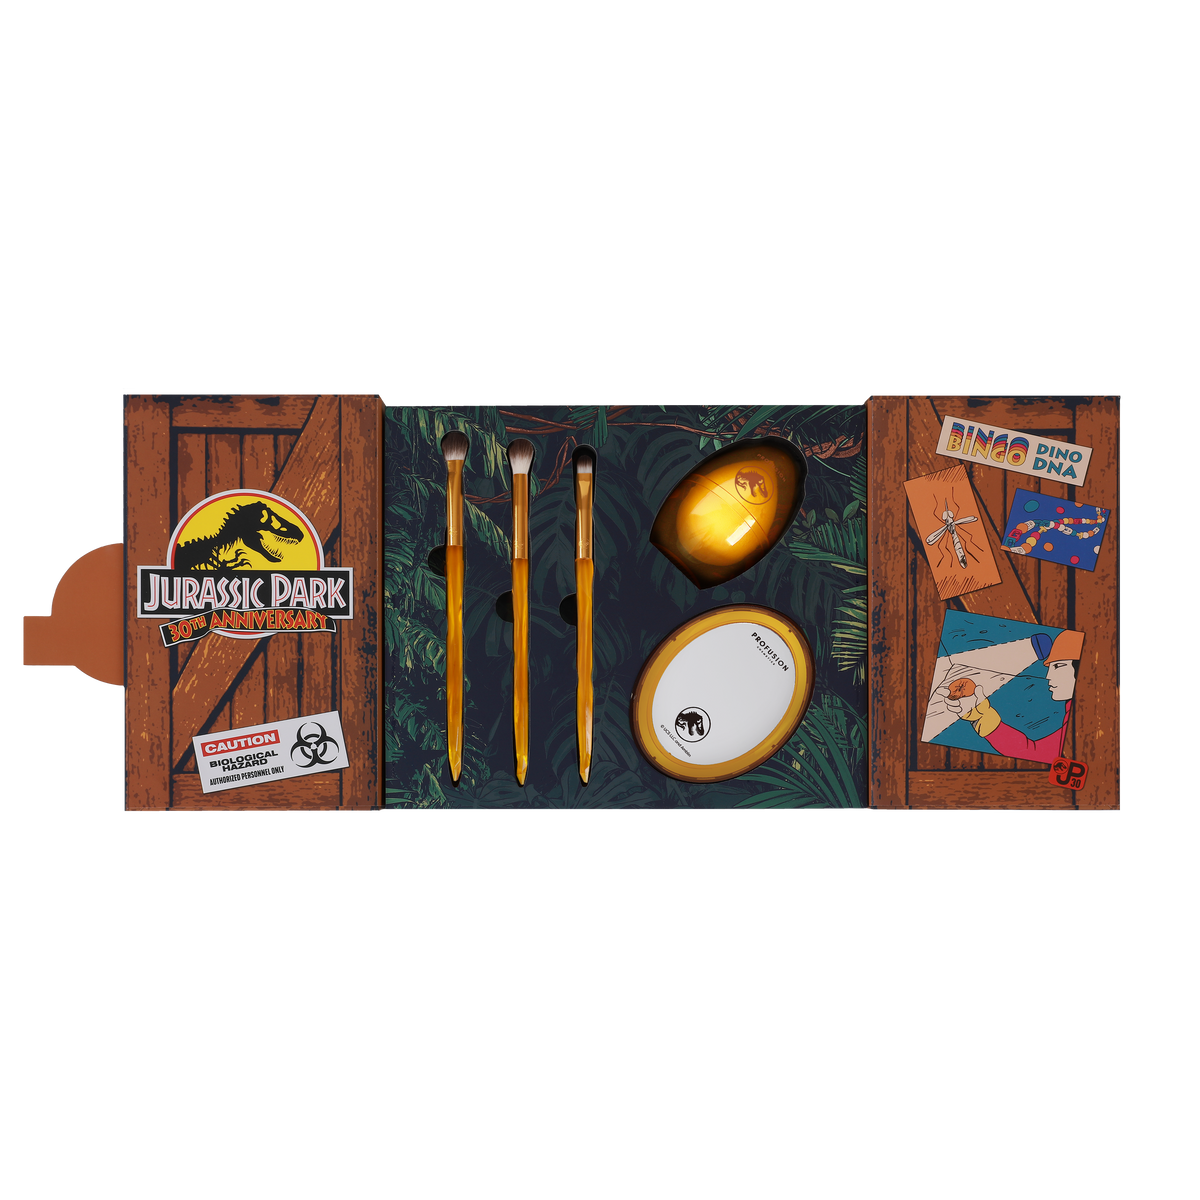 opened brush set with jurassic logo on left and three eyeshadow brushes and beauty blender and mirror in the middle , and on the right side different cartoon pictures one of a mosquito, a miner finding a mosquito in amber the words &#39;&#39; Bingo, Dino, DNA&quot;